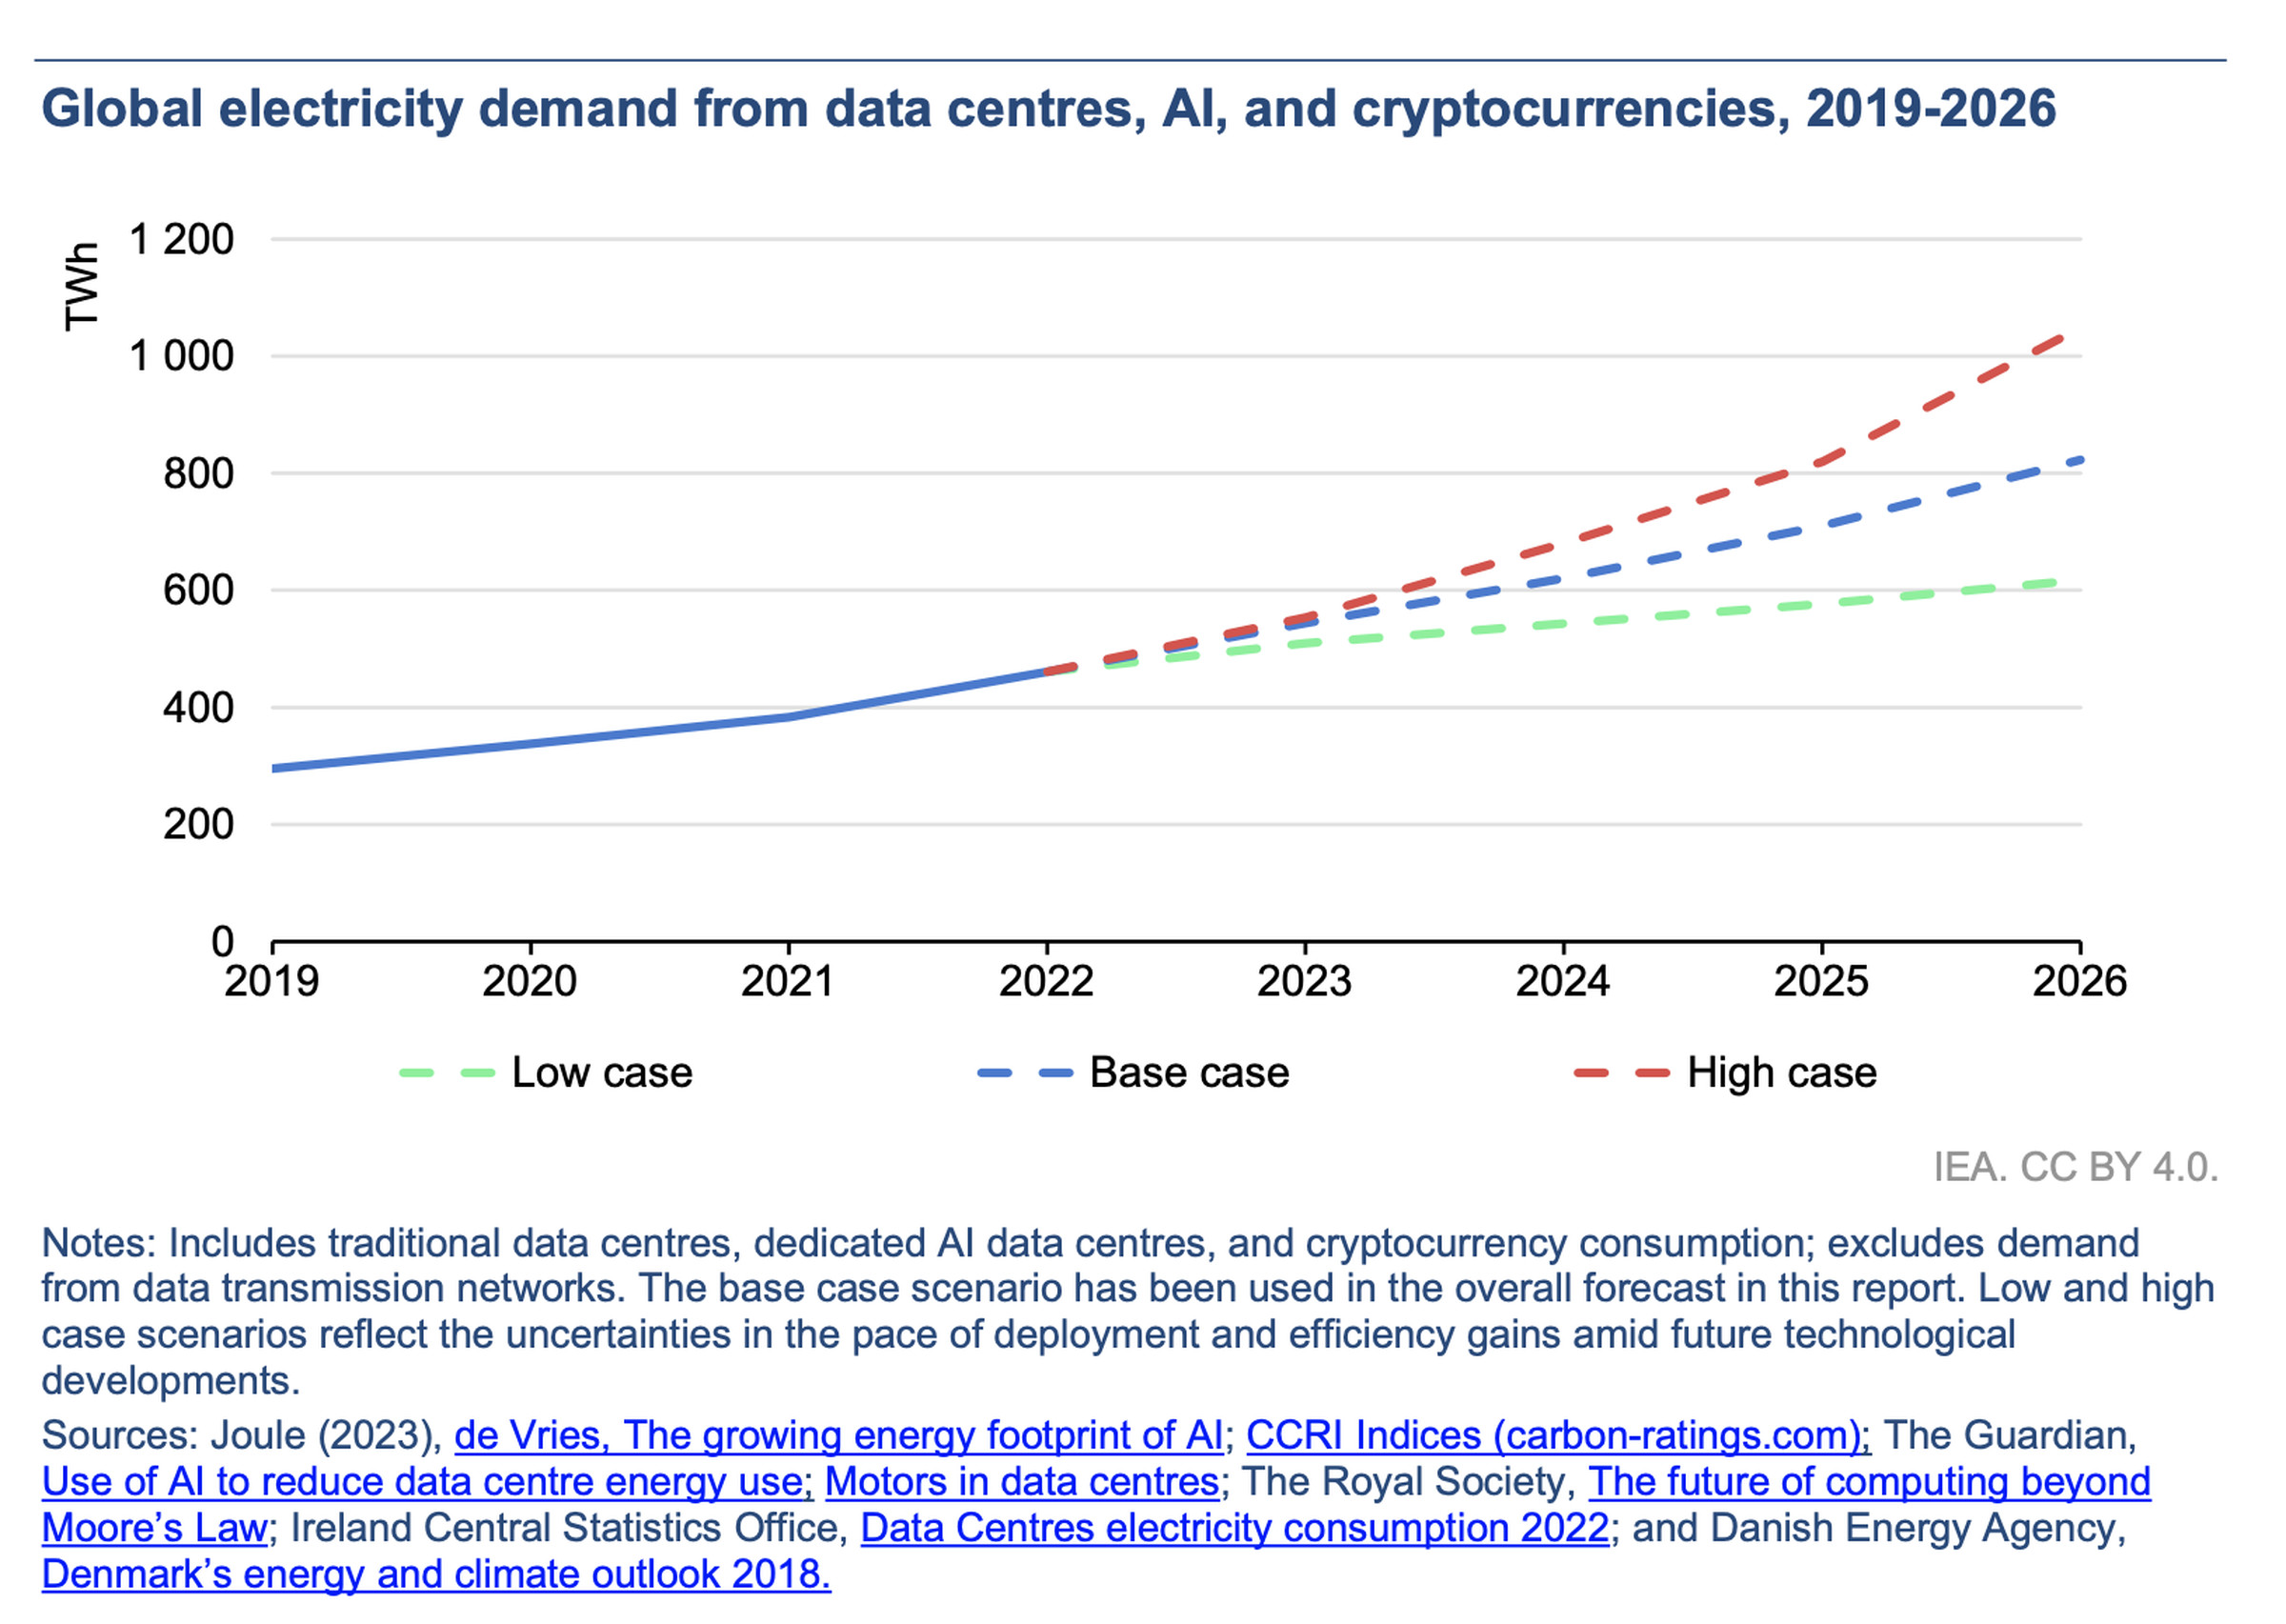 A graph showsgrowing global electricity demand from data centers, AI, and cryptocurrencies between 2019 and 2026. In 2019, demand was roughly 300 TWh of electricity. By 2026, the graph shows electricity demand rising to more than 1,000 TWh.